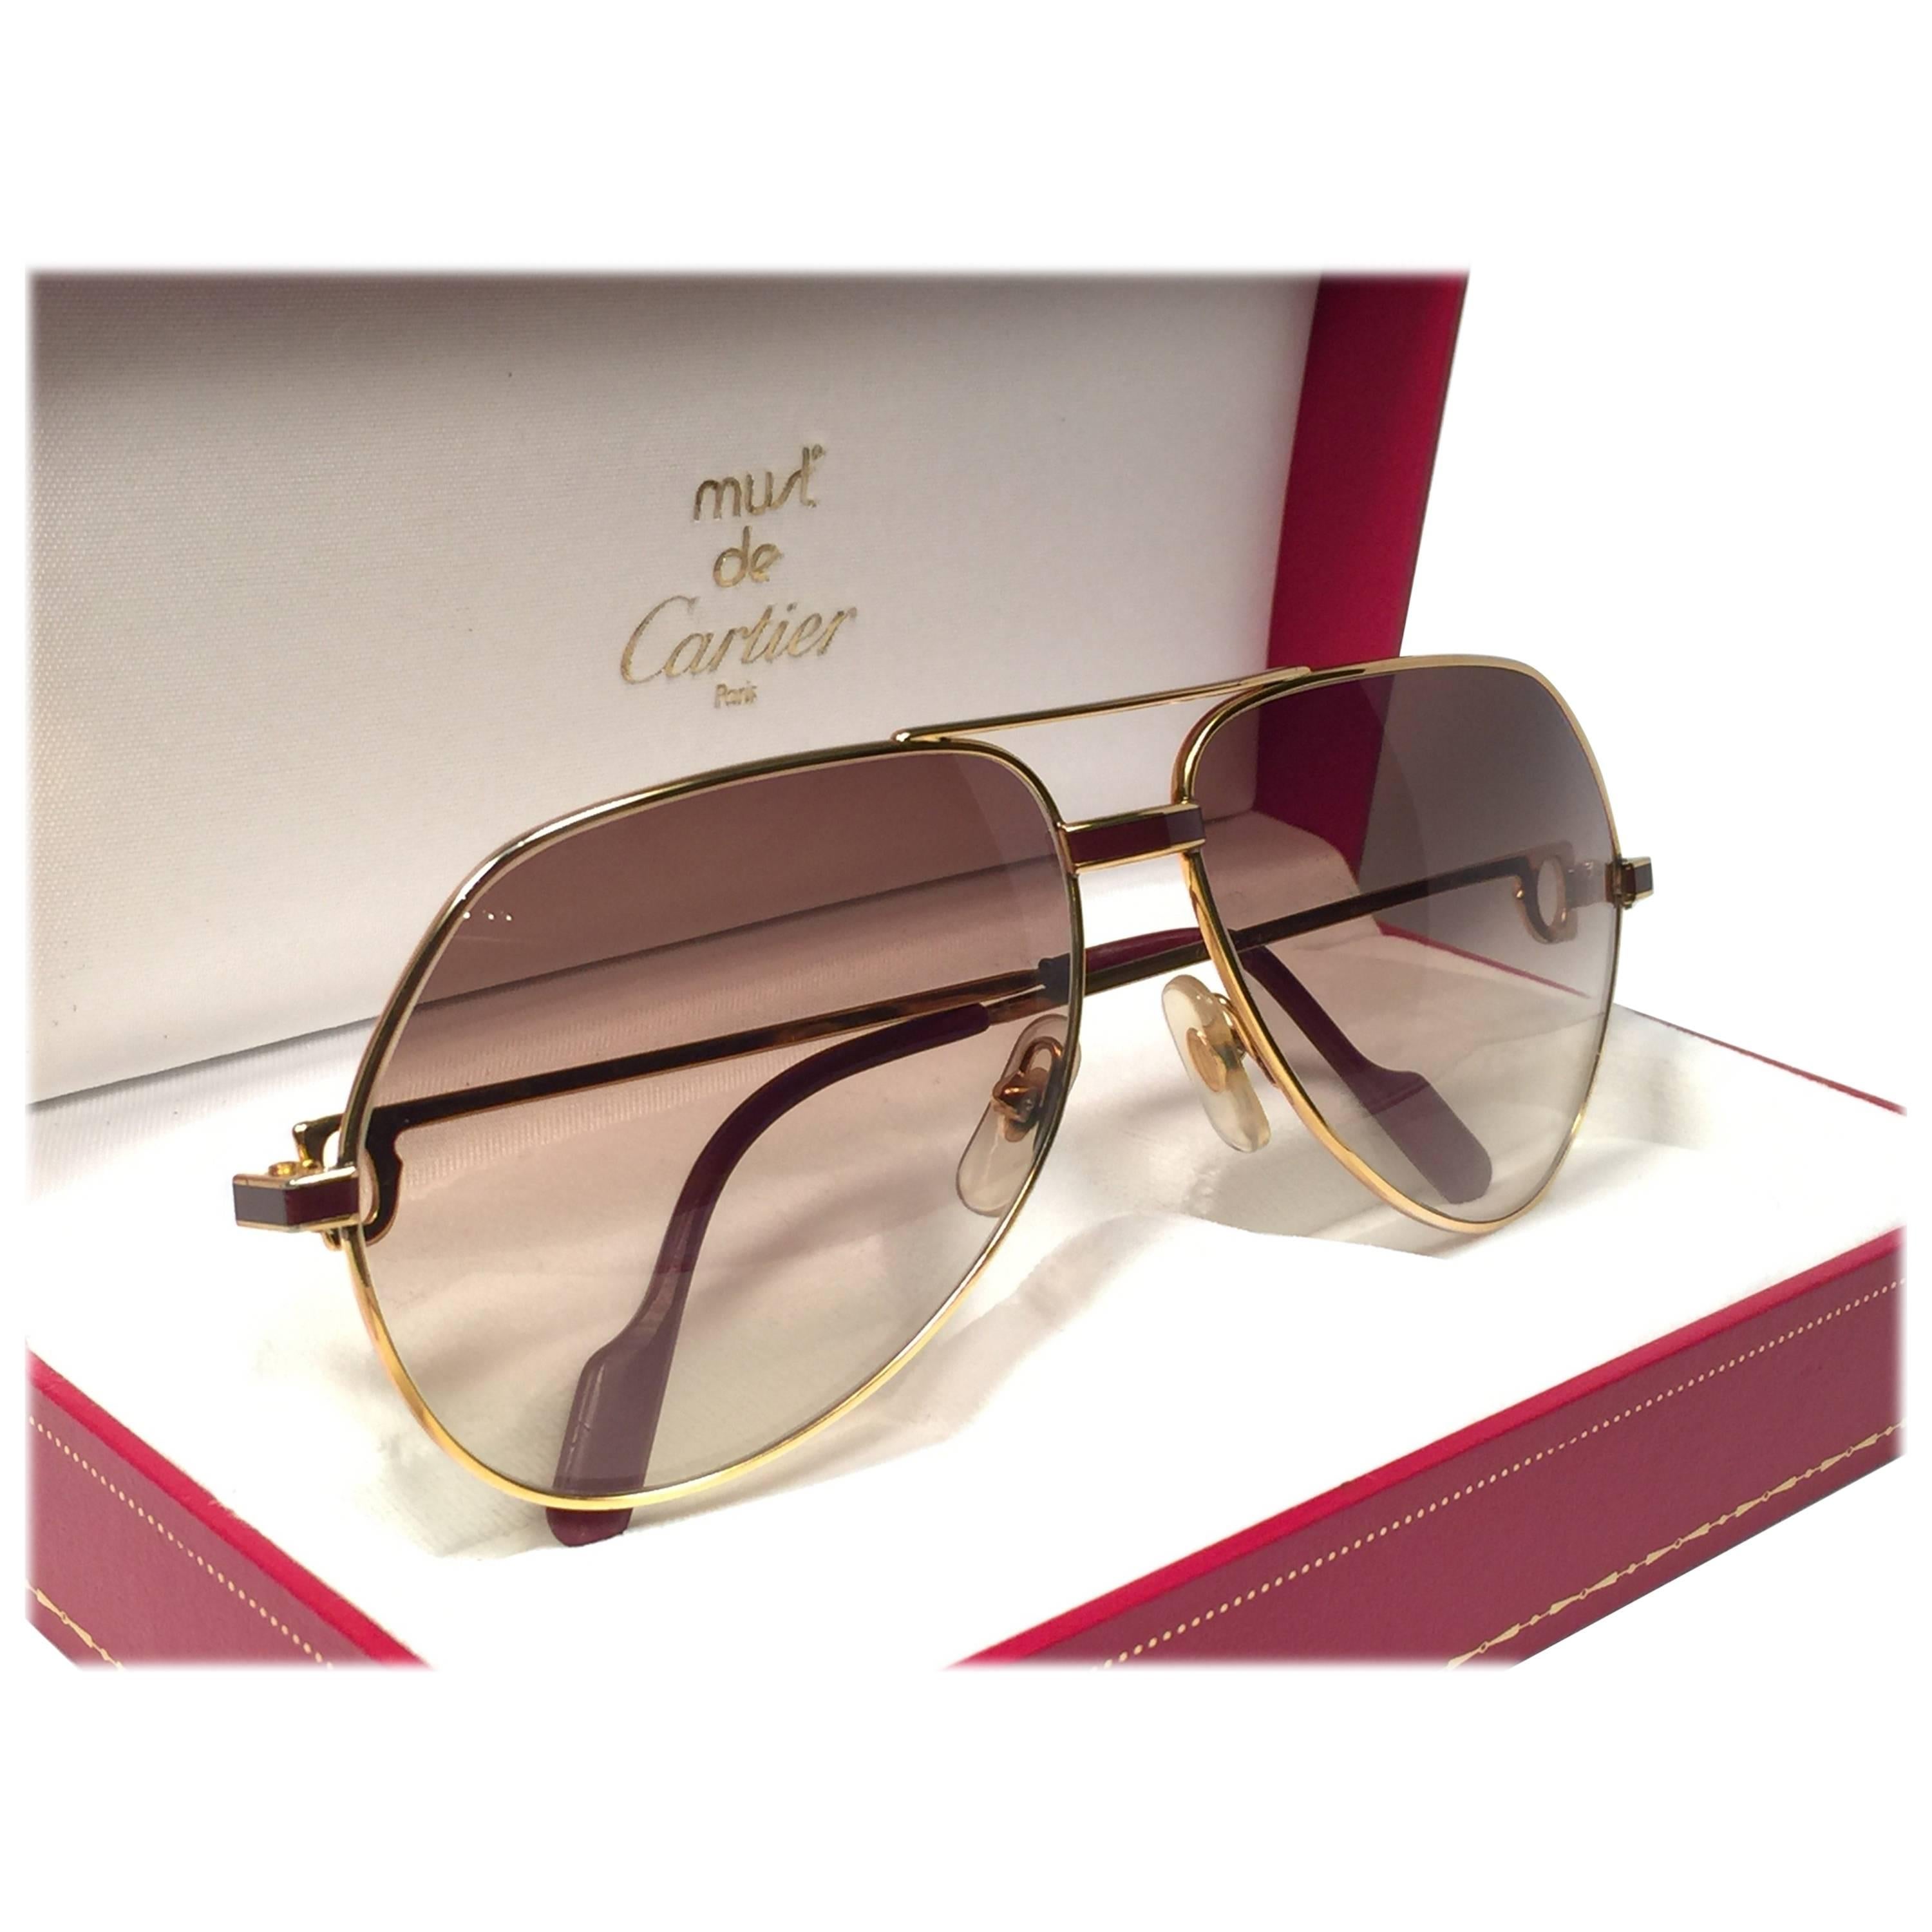 New Cartier Laque de Chine Aviator Gold 62Mm Heavy Plated Sunglasses France